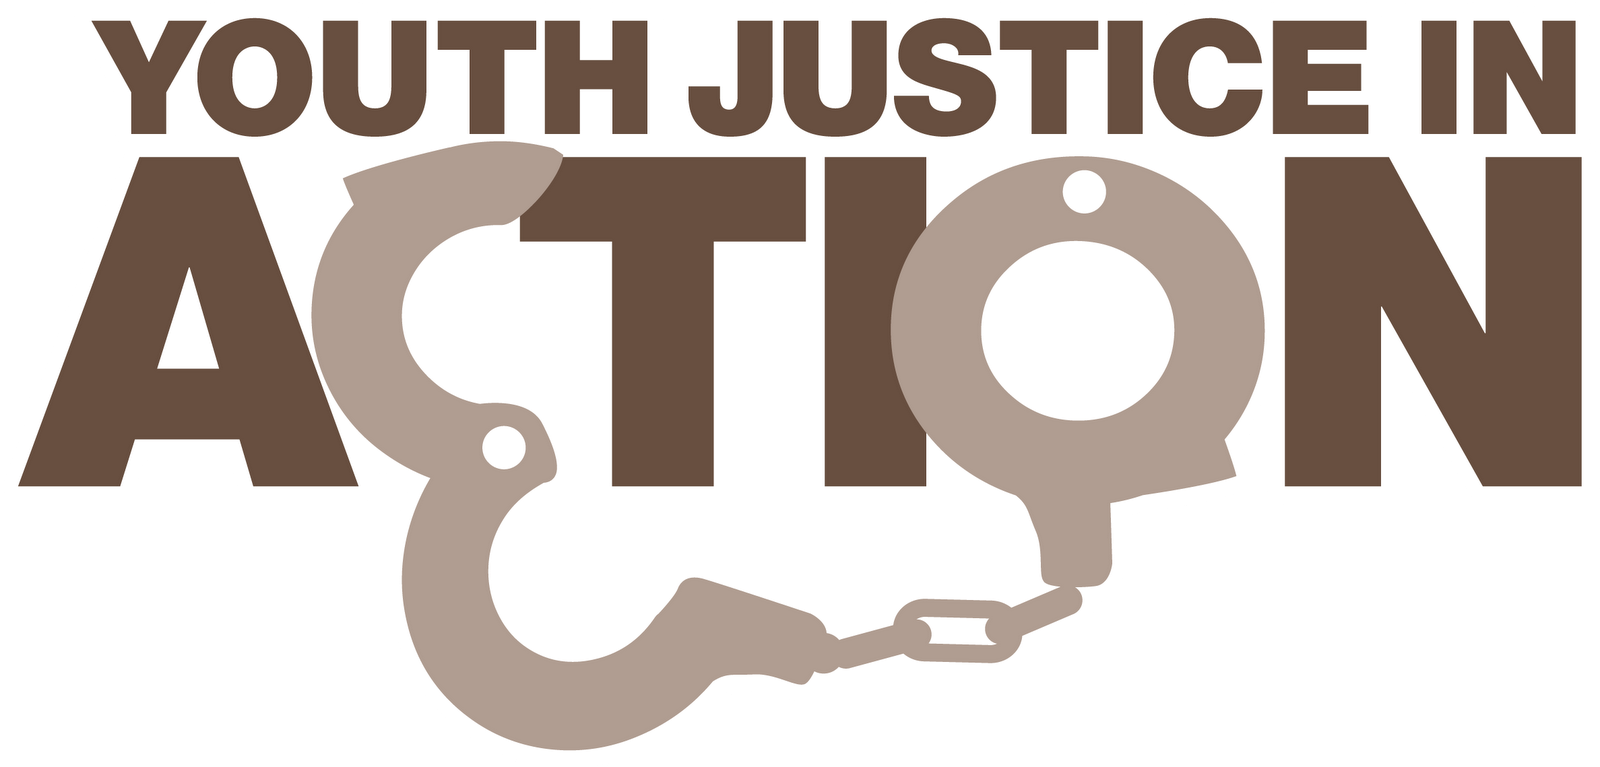 Youth Justice in Action Campaign